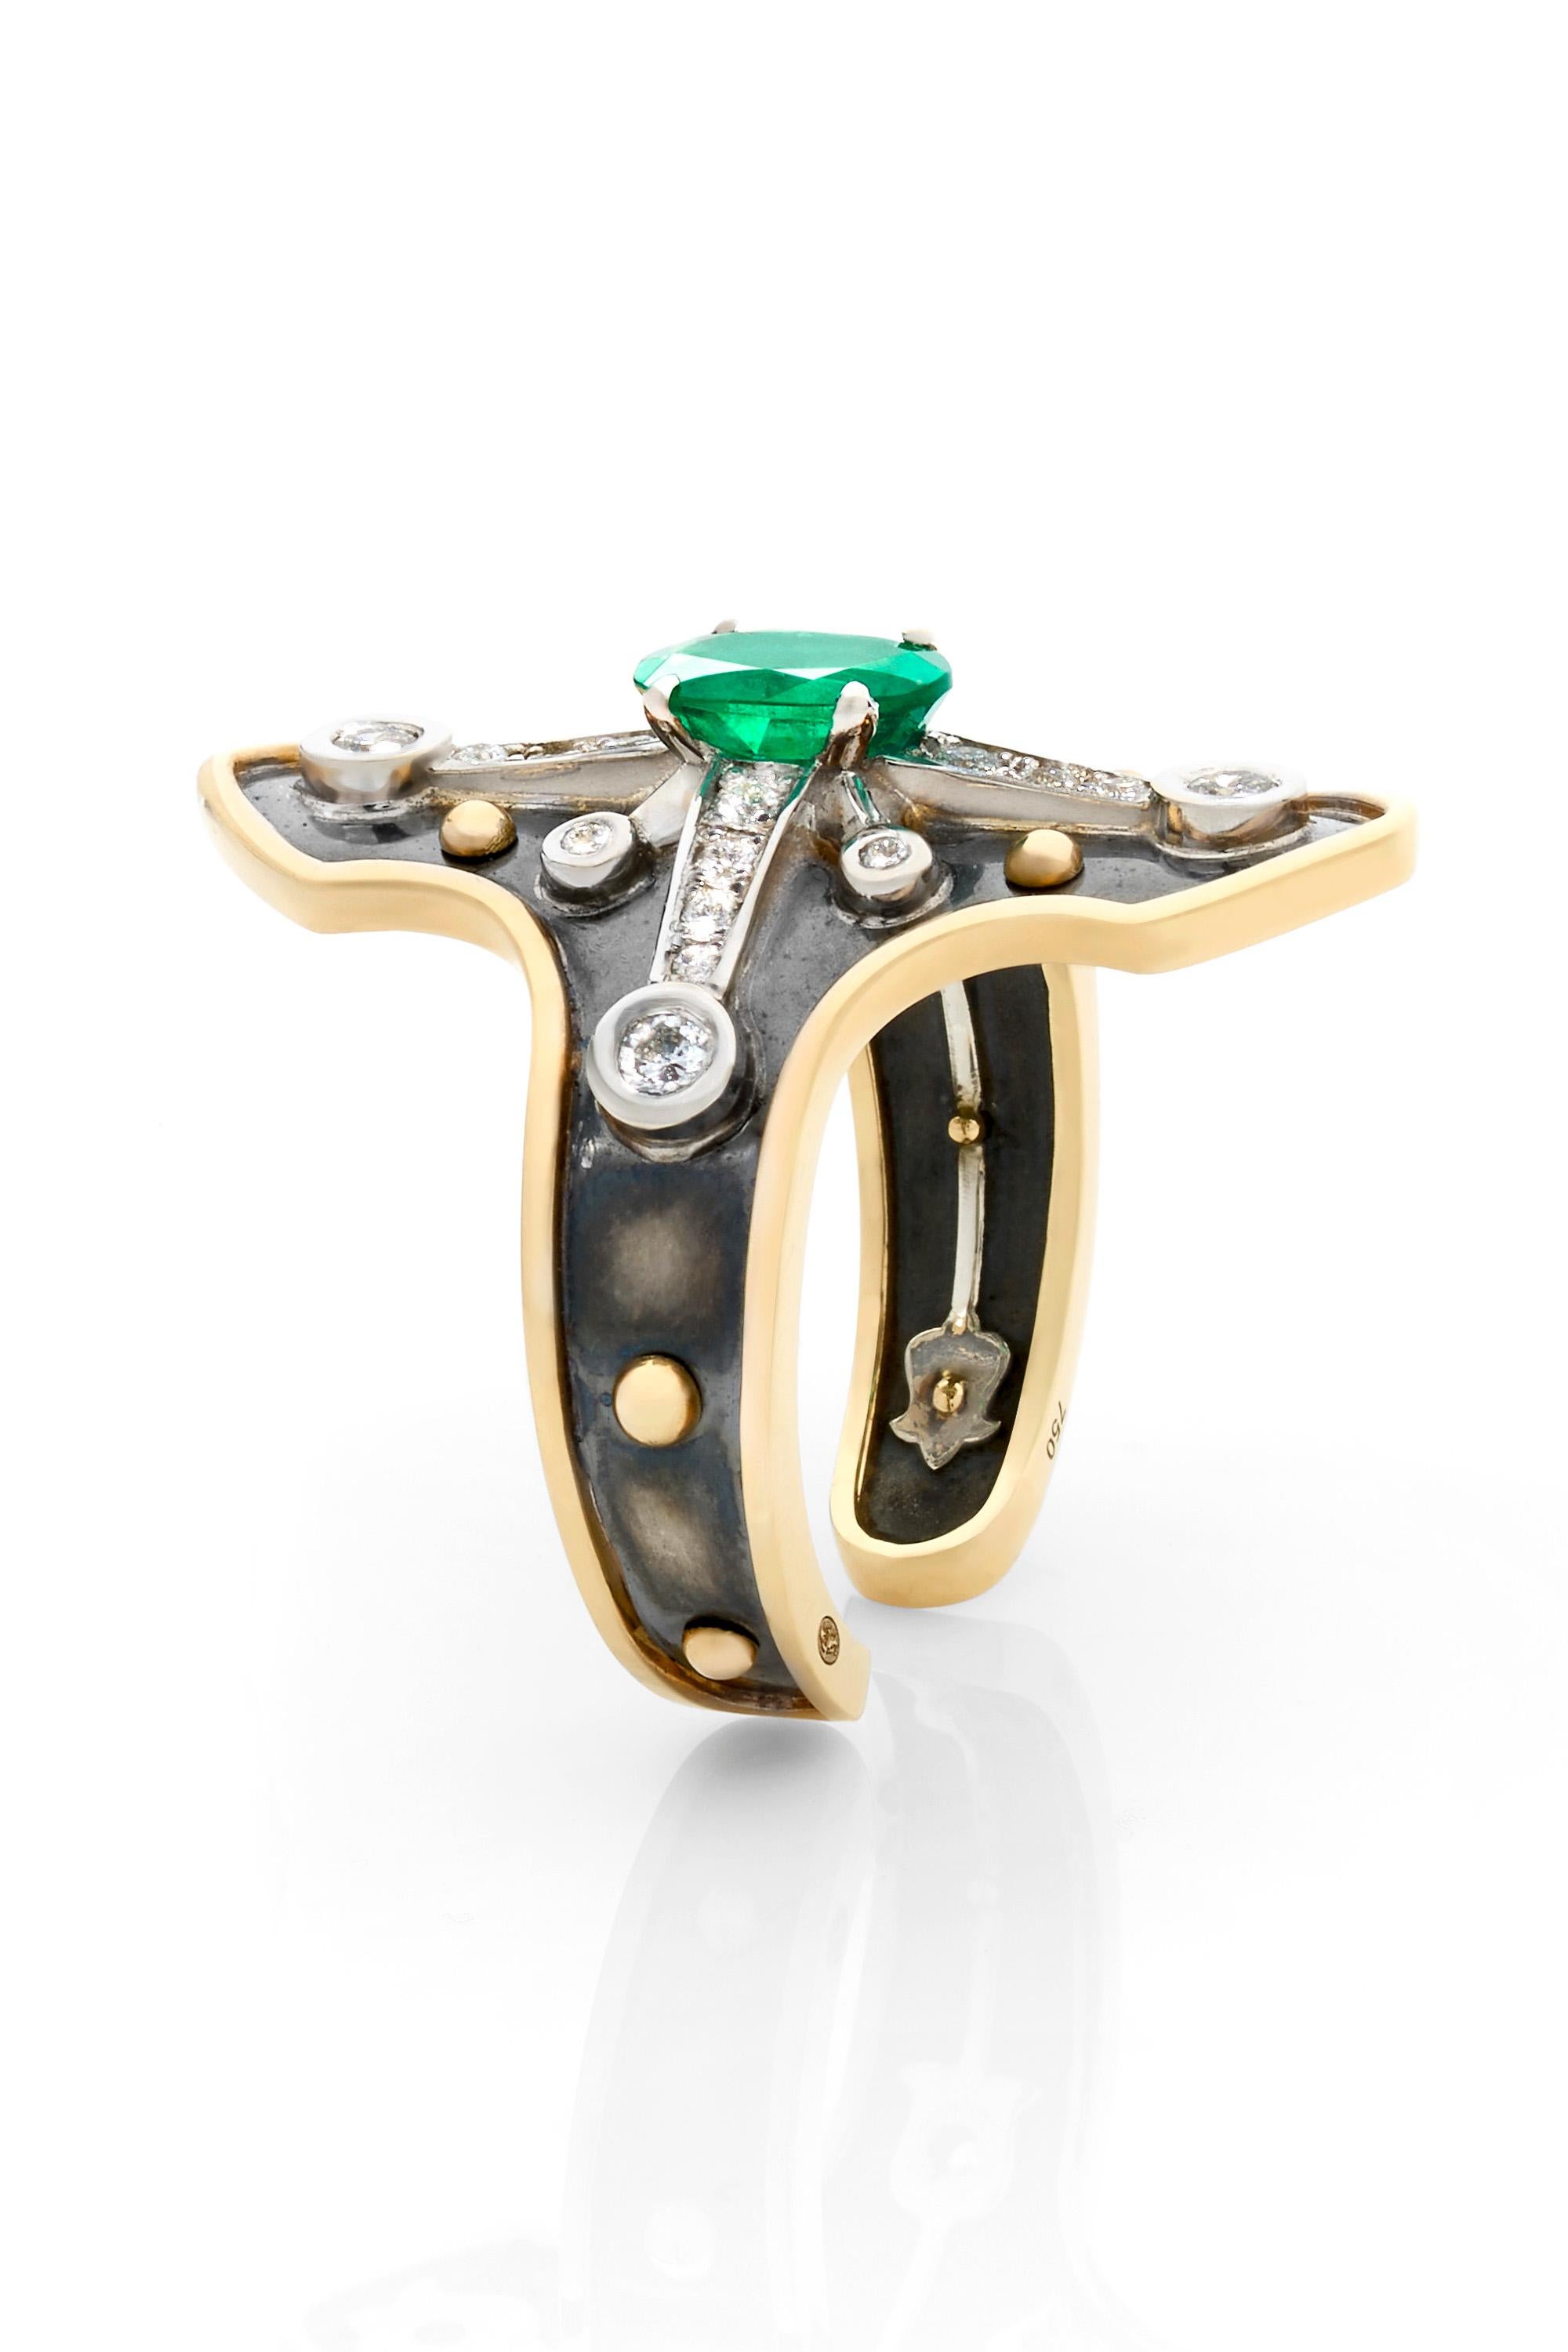 Emerald Cut Emerald & Diamond Heaume Ring  in 18k Gold by Elie Top For Sale